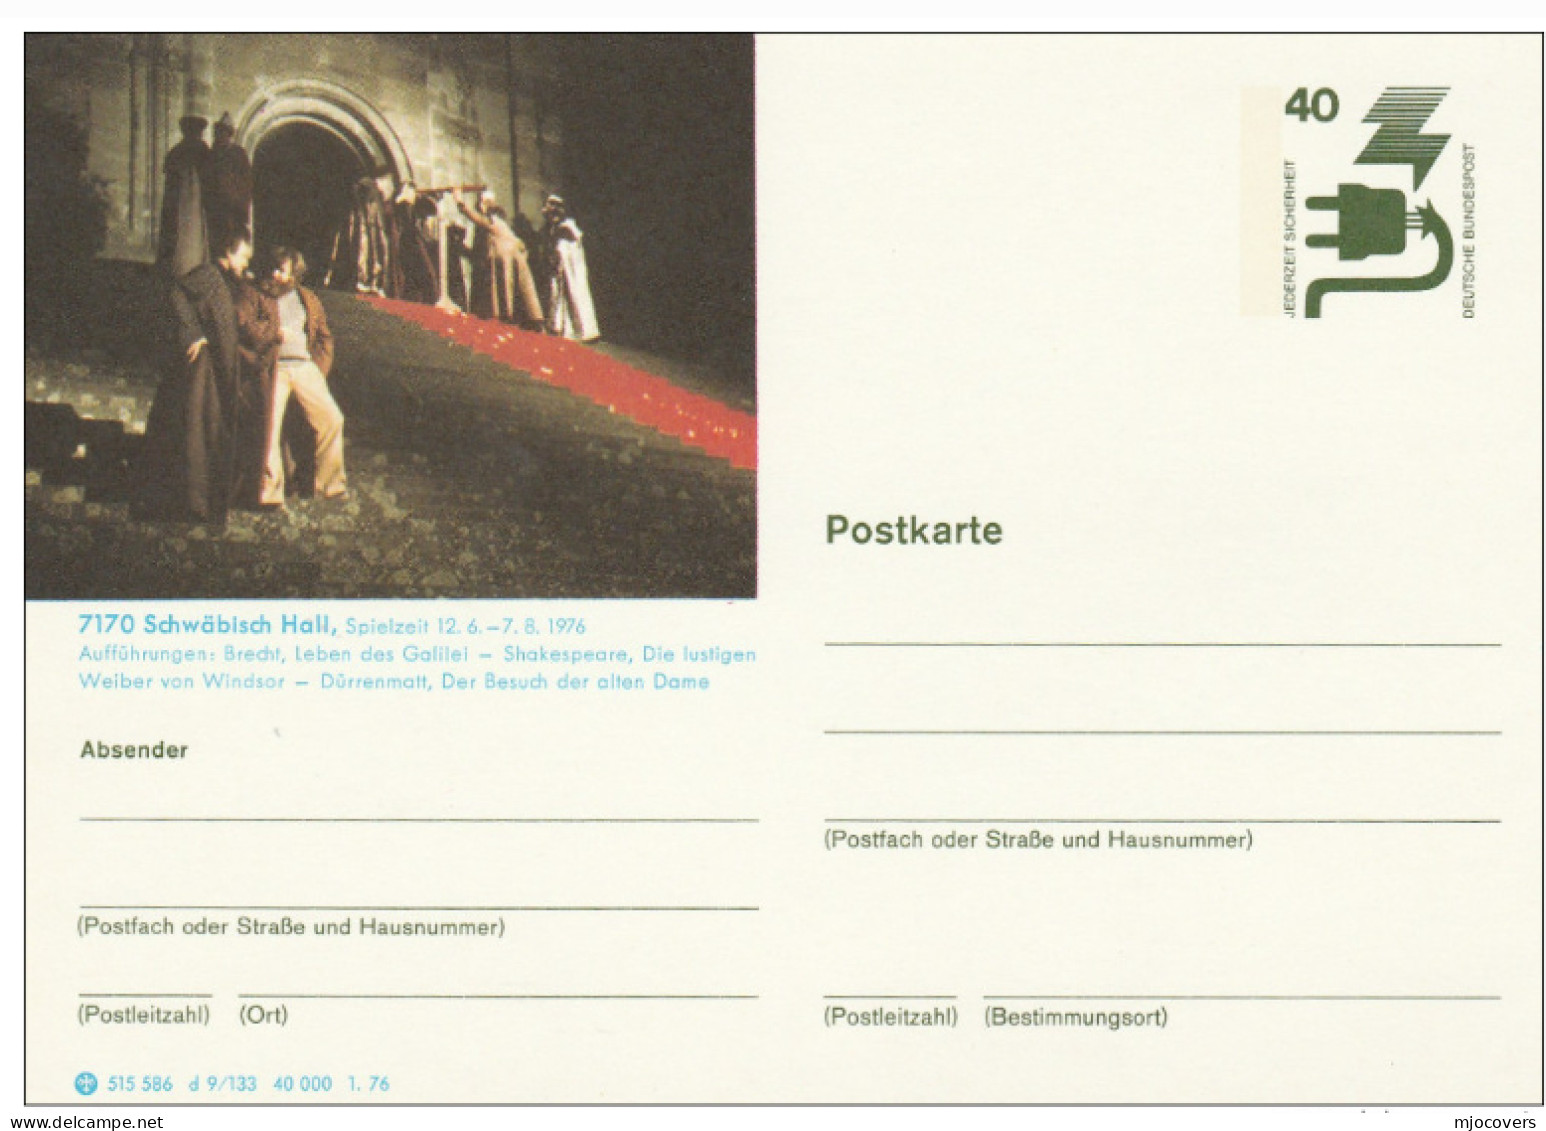 SHAKESPEARE At SCHWABISCH HALL THEATRE Postal STATIONERY Card 1976 Germany Cover Stamps - Theater